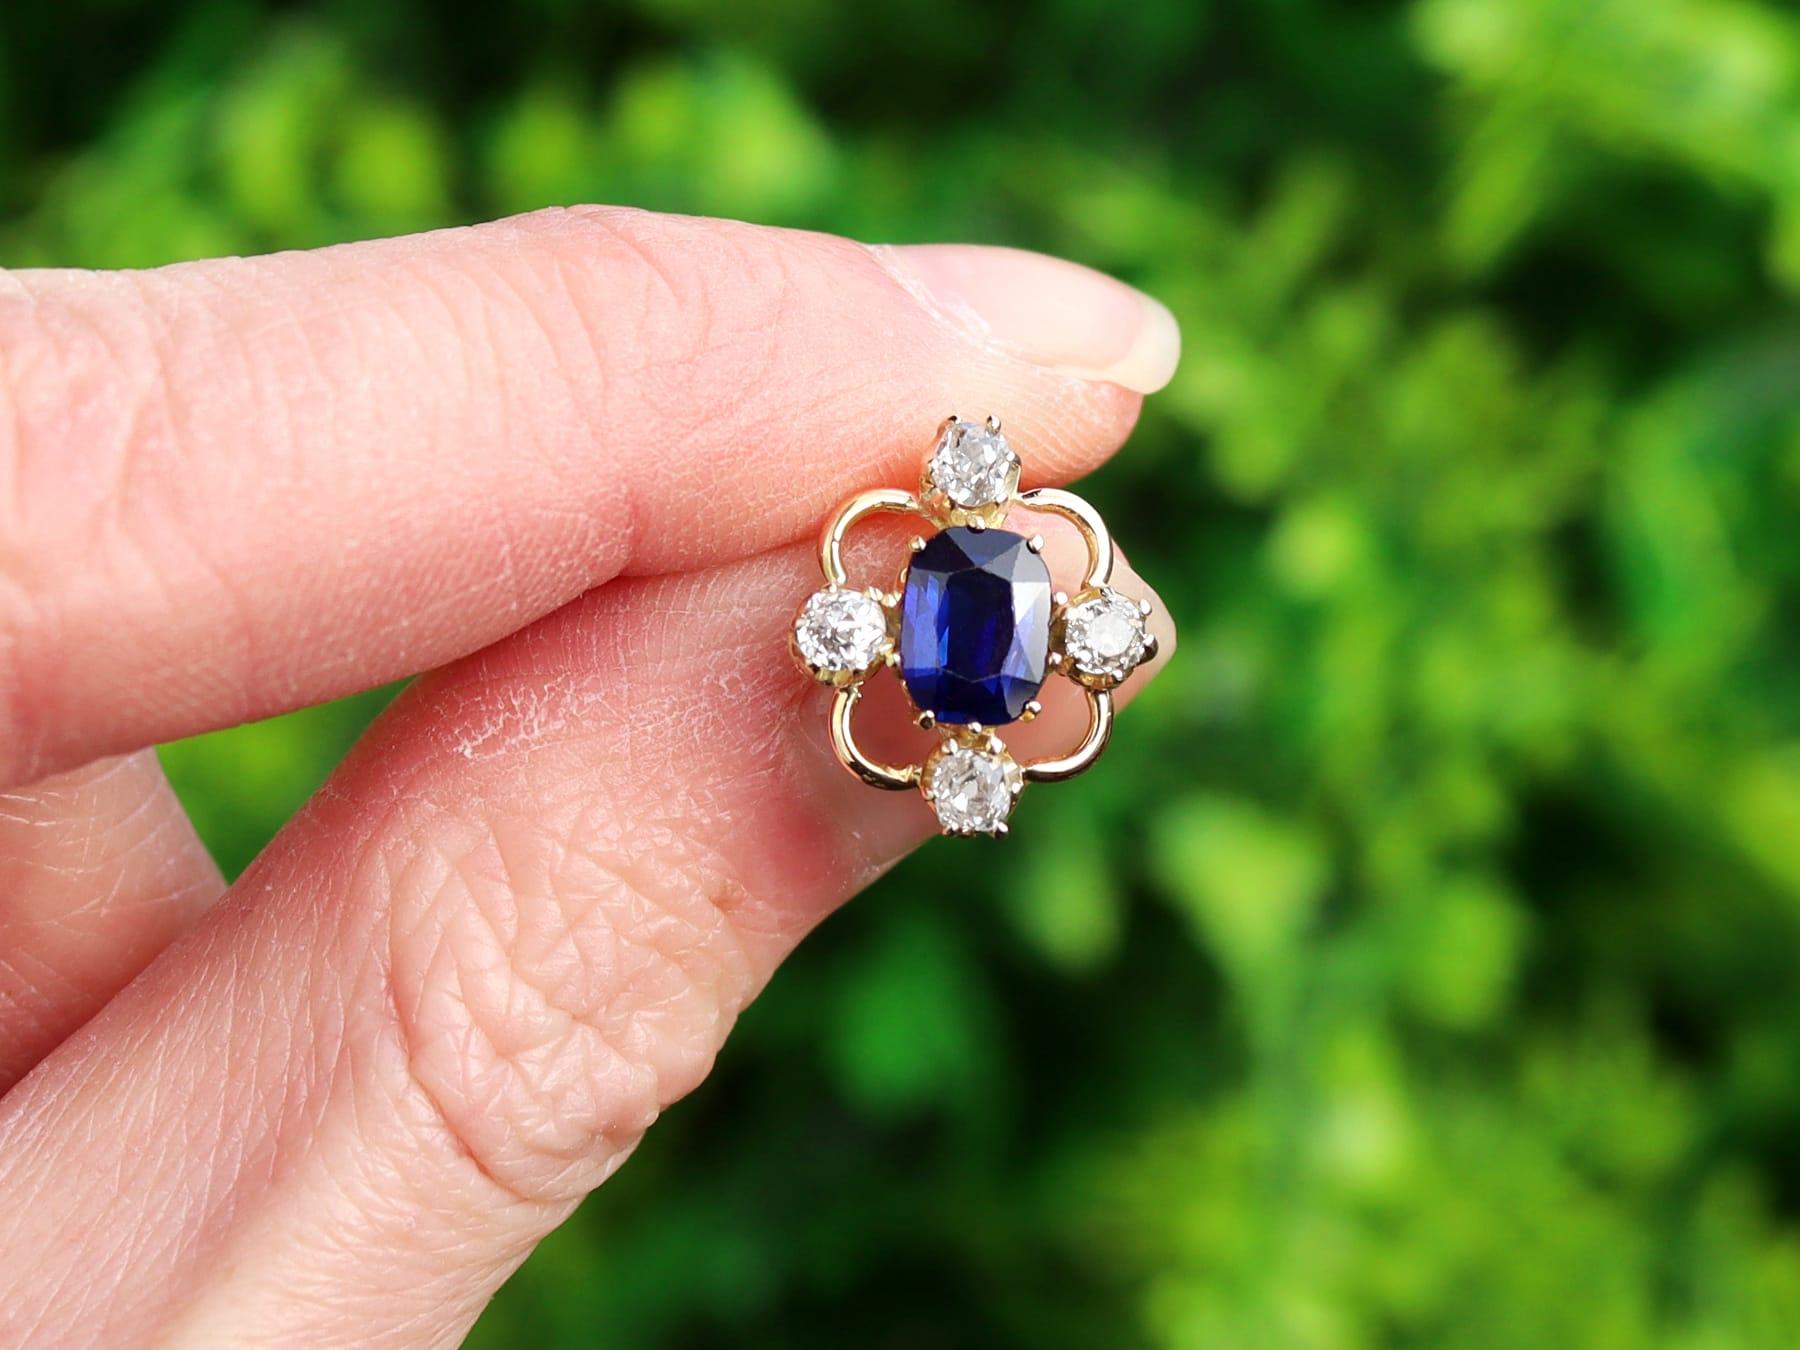 A stunning, fine and impressive pair of antique1.90 carat blue sapphire and 0.50 carat diamond, 15 carat yellow gold earrings; part of our antique earring collections

These stunning, fine and impressive antique sapphire and diamond earrings are